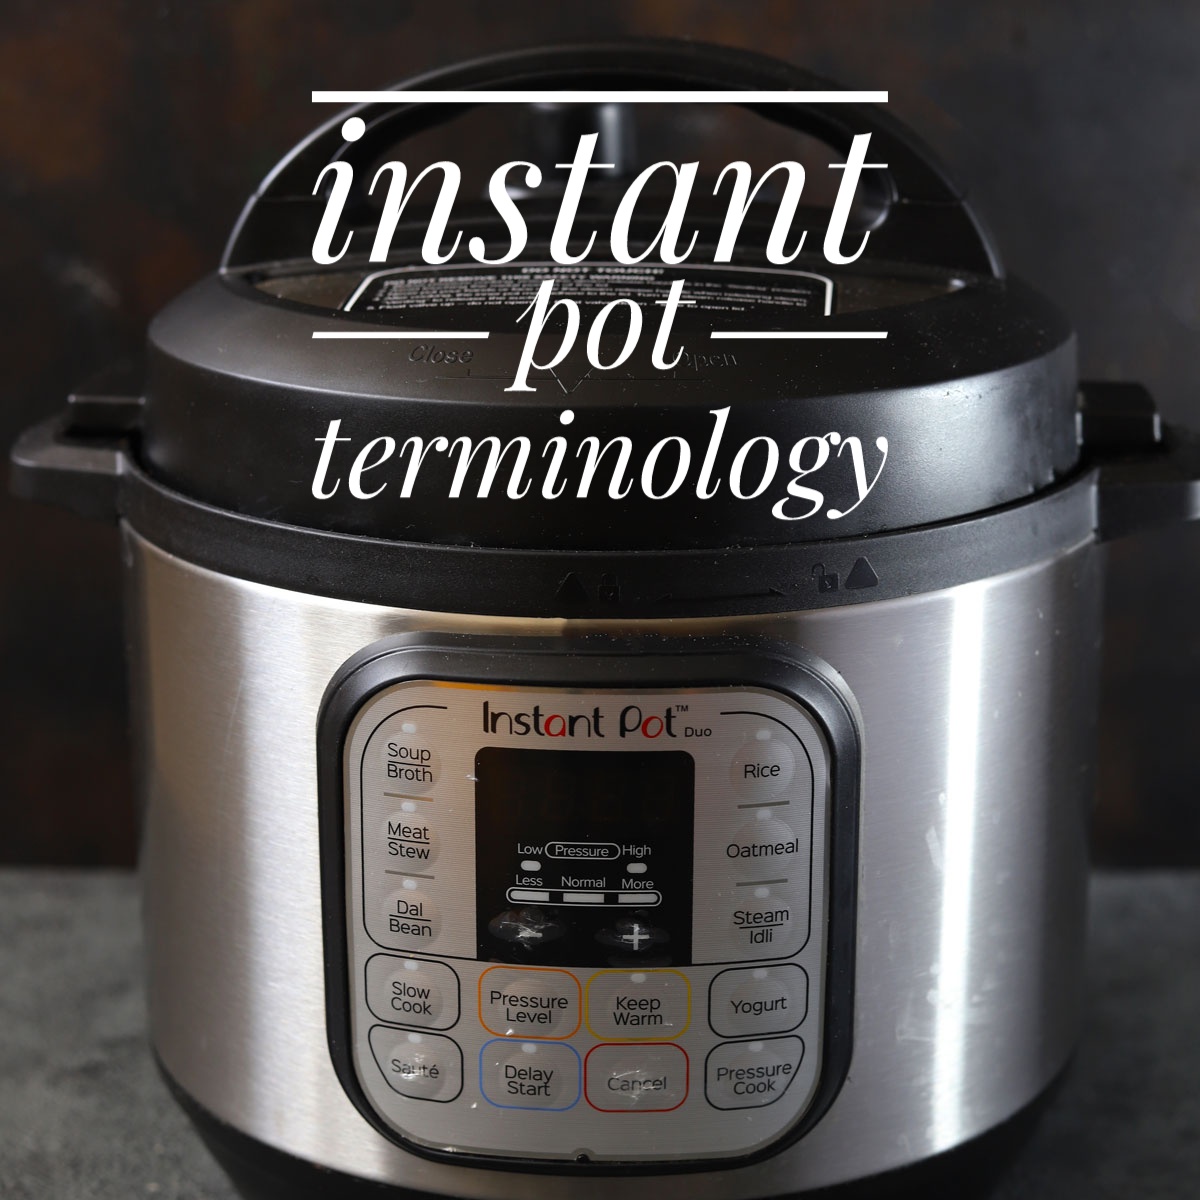 Glossary Of Instant Pot Terms ~ My Creative Manner